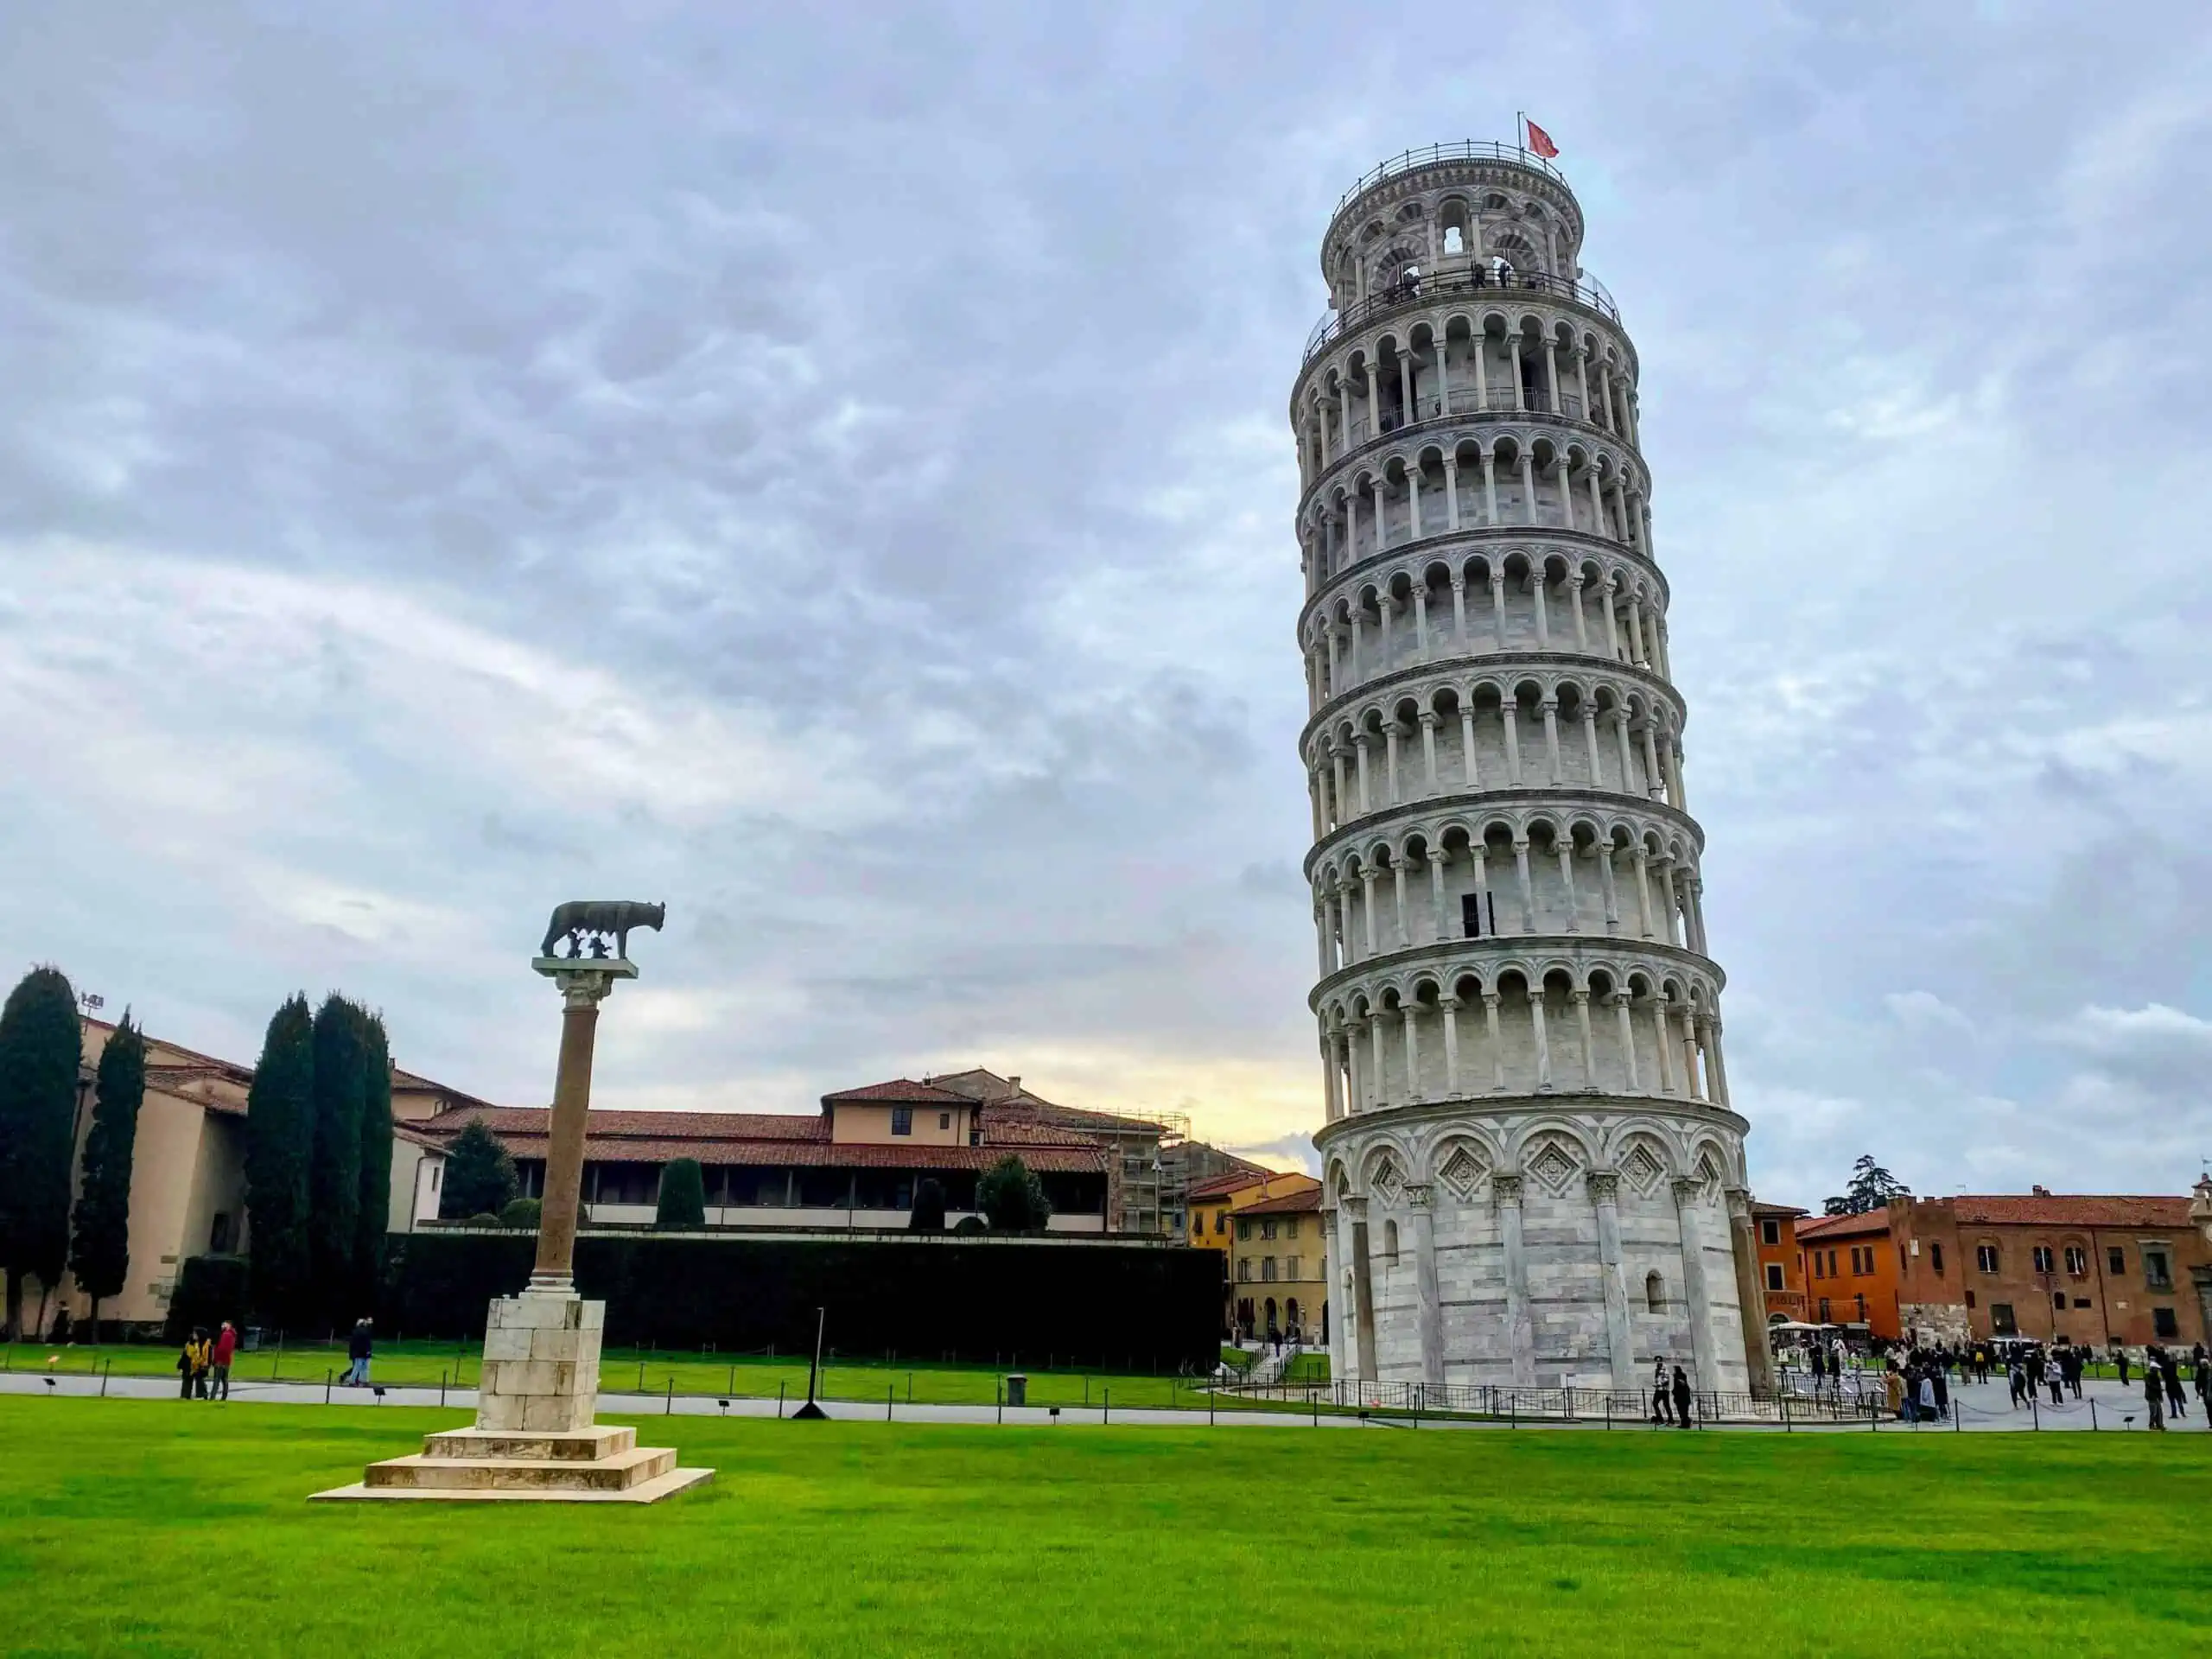 View of the Leaning Tower of Pisa in Italy.